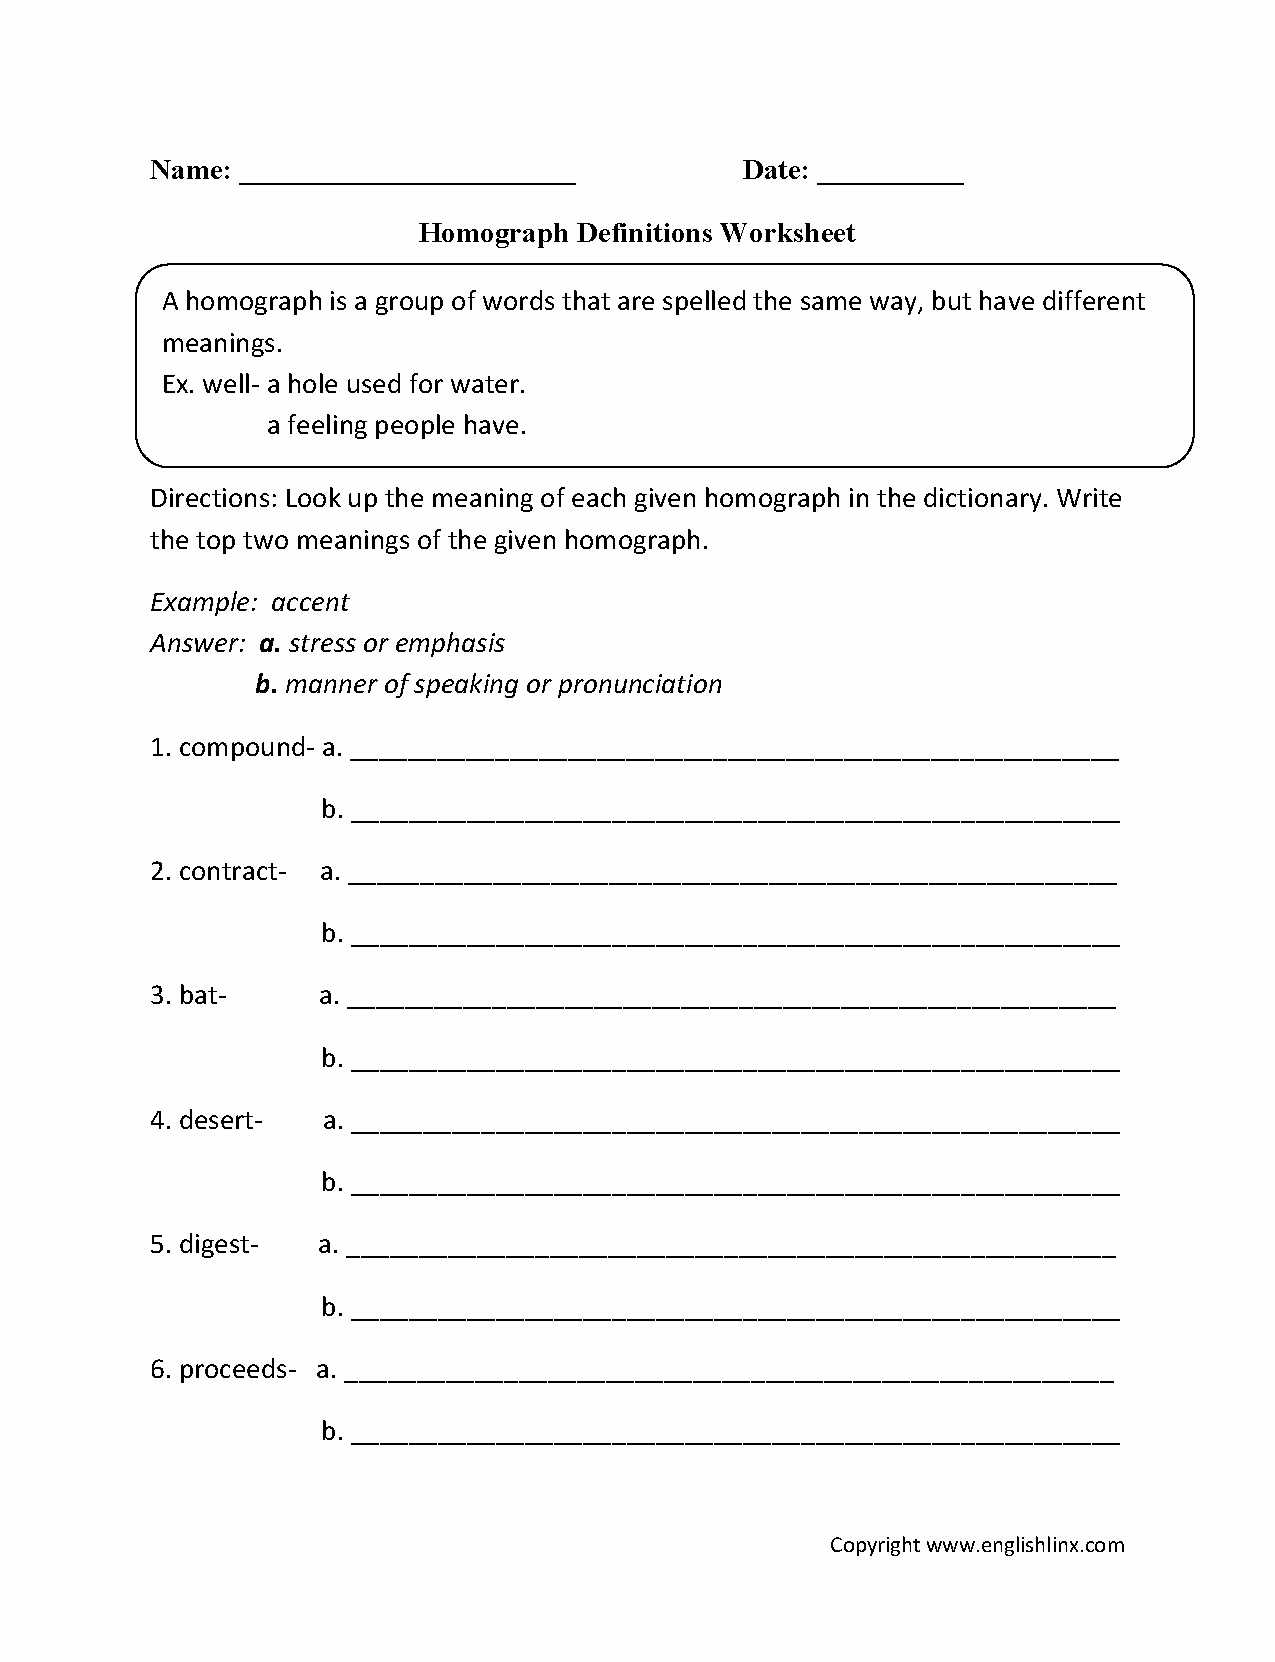 Metric Conversion Practice Worksheet together with 14 Beautiful Homonyms Worksheets